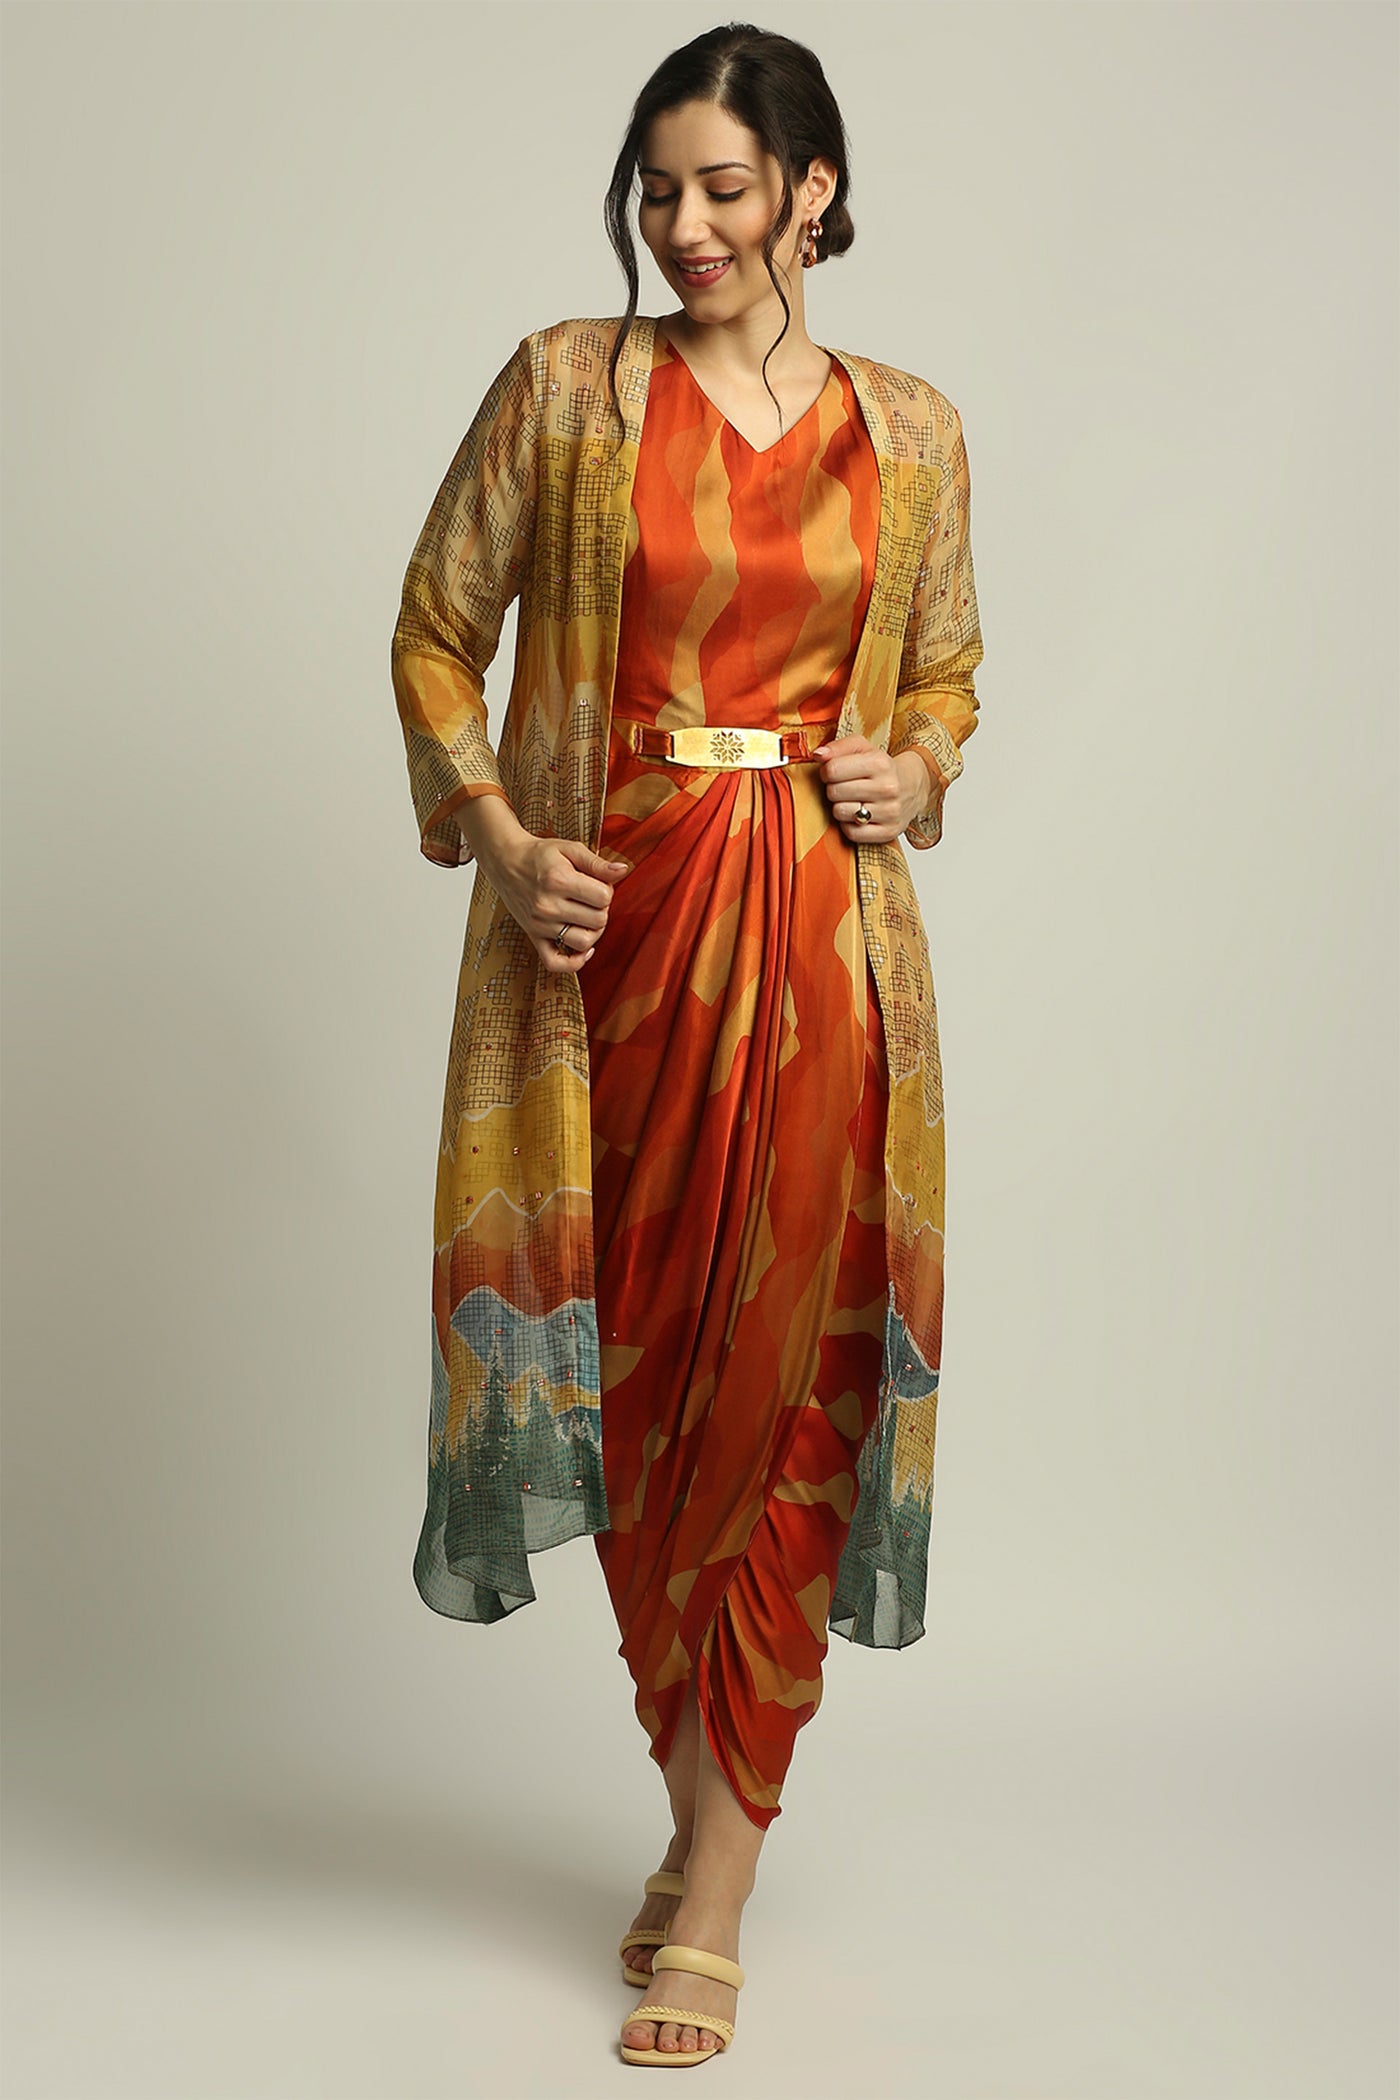 sougat paul Dune Shadow Printed Pre-stitched Saree With Blouse multicolor fusion indian designer wear online shopping melange singapore